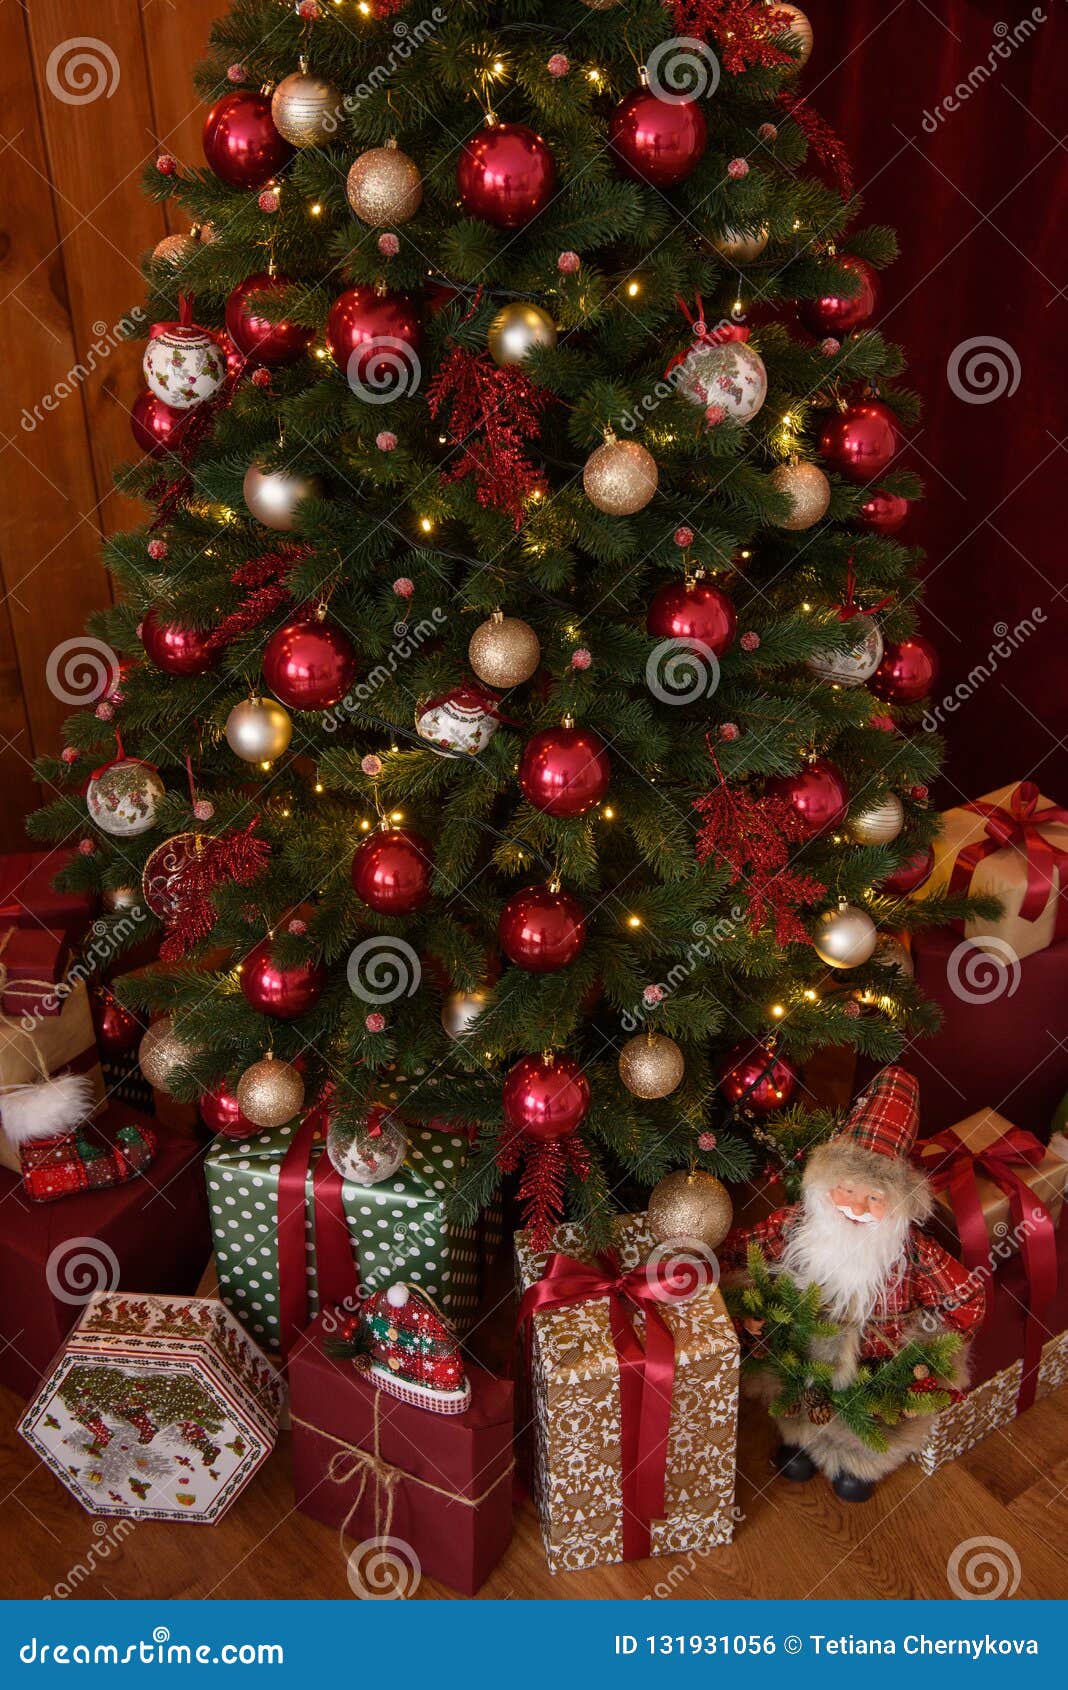 Christmas Interior With Gift Boxes And Christmas Fires Stock